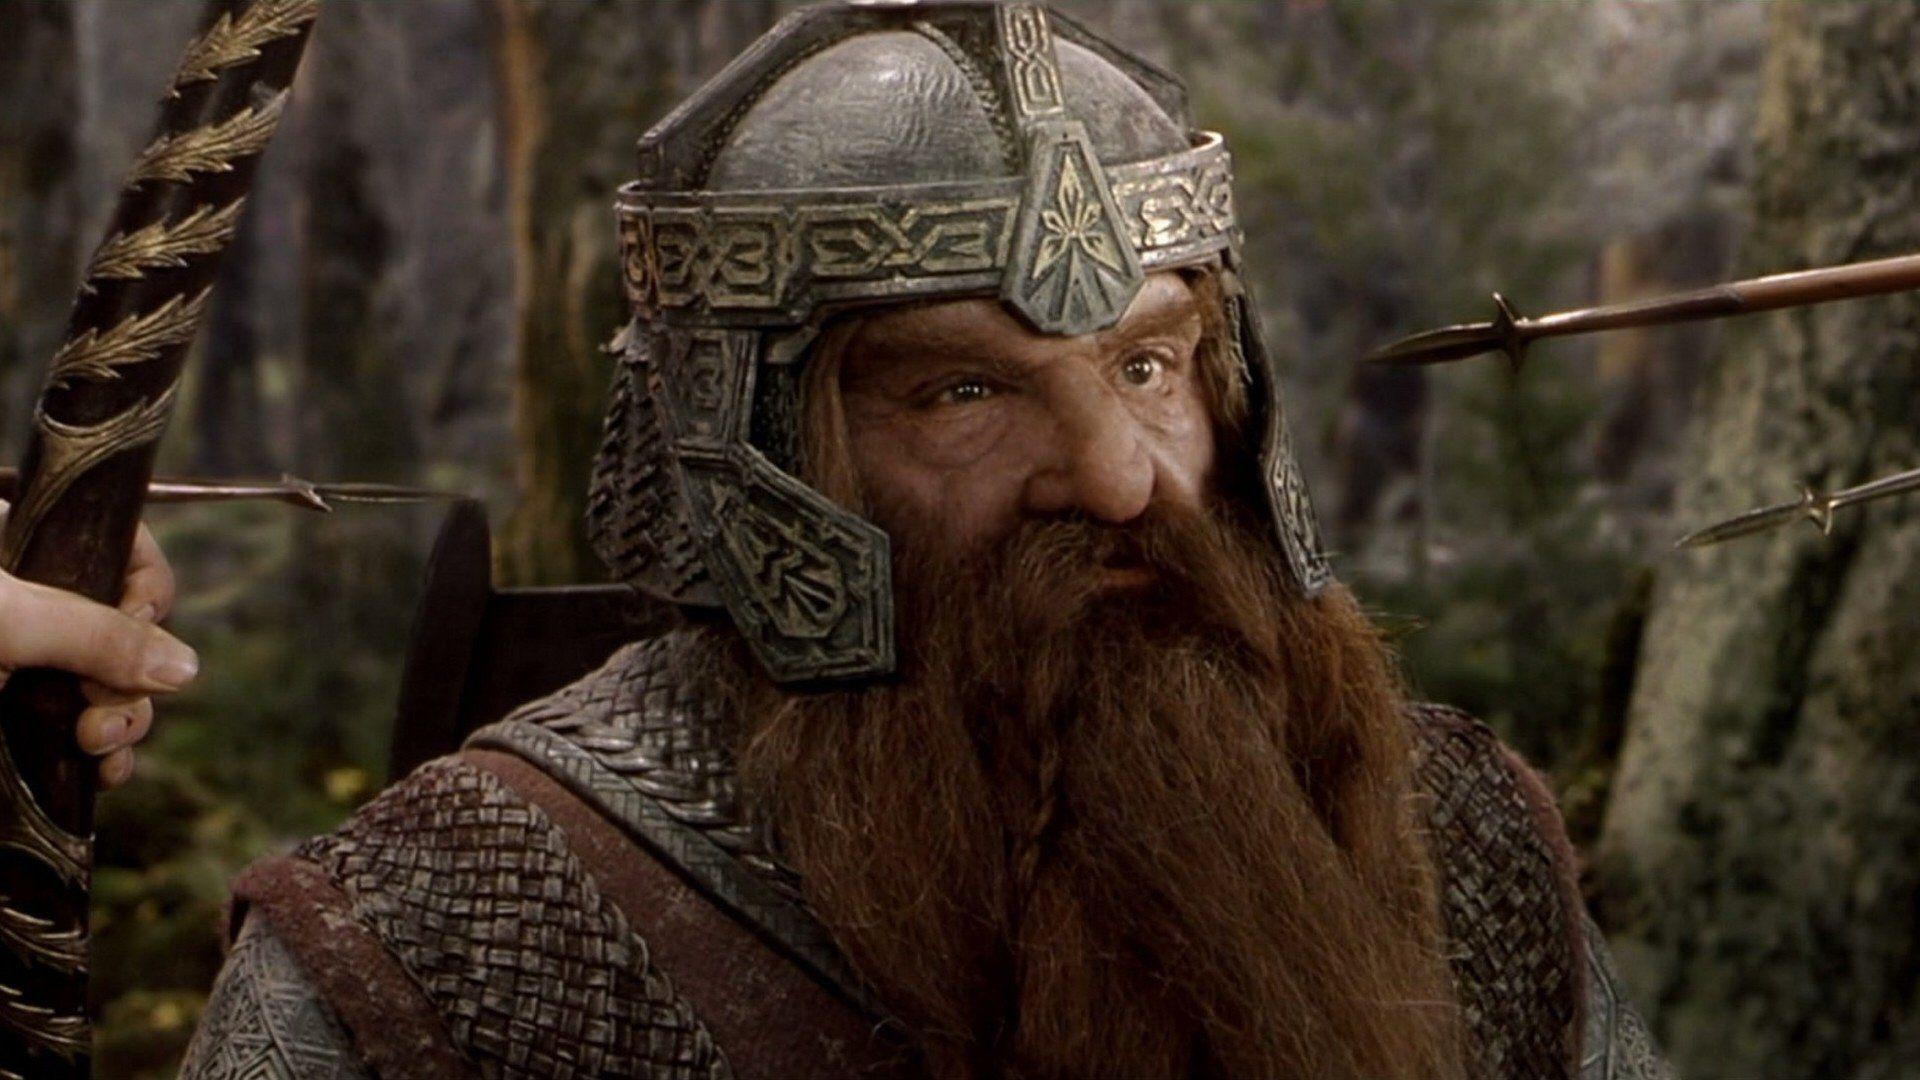 Gimli is waring a helmet and has weapons being held towards his head. 